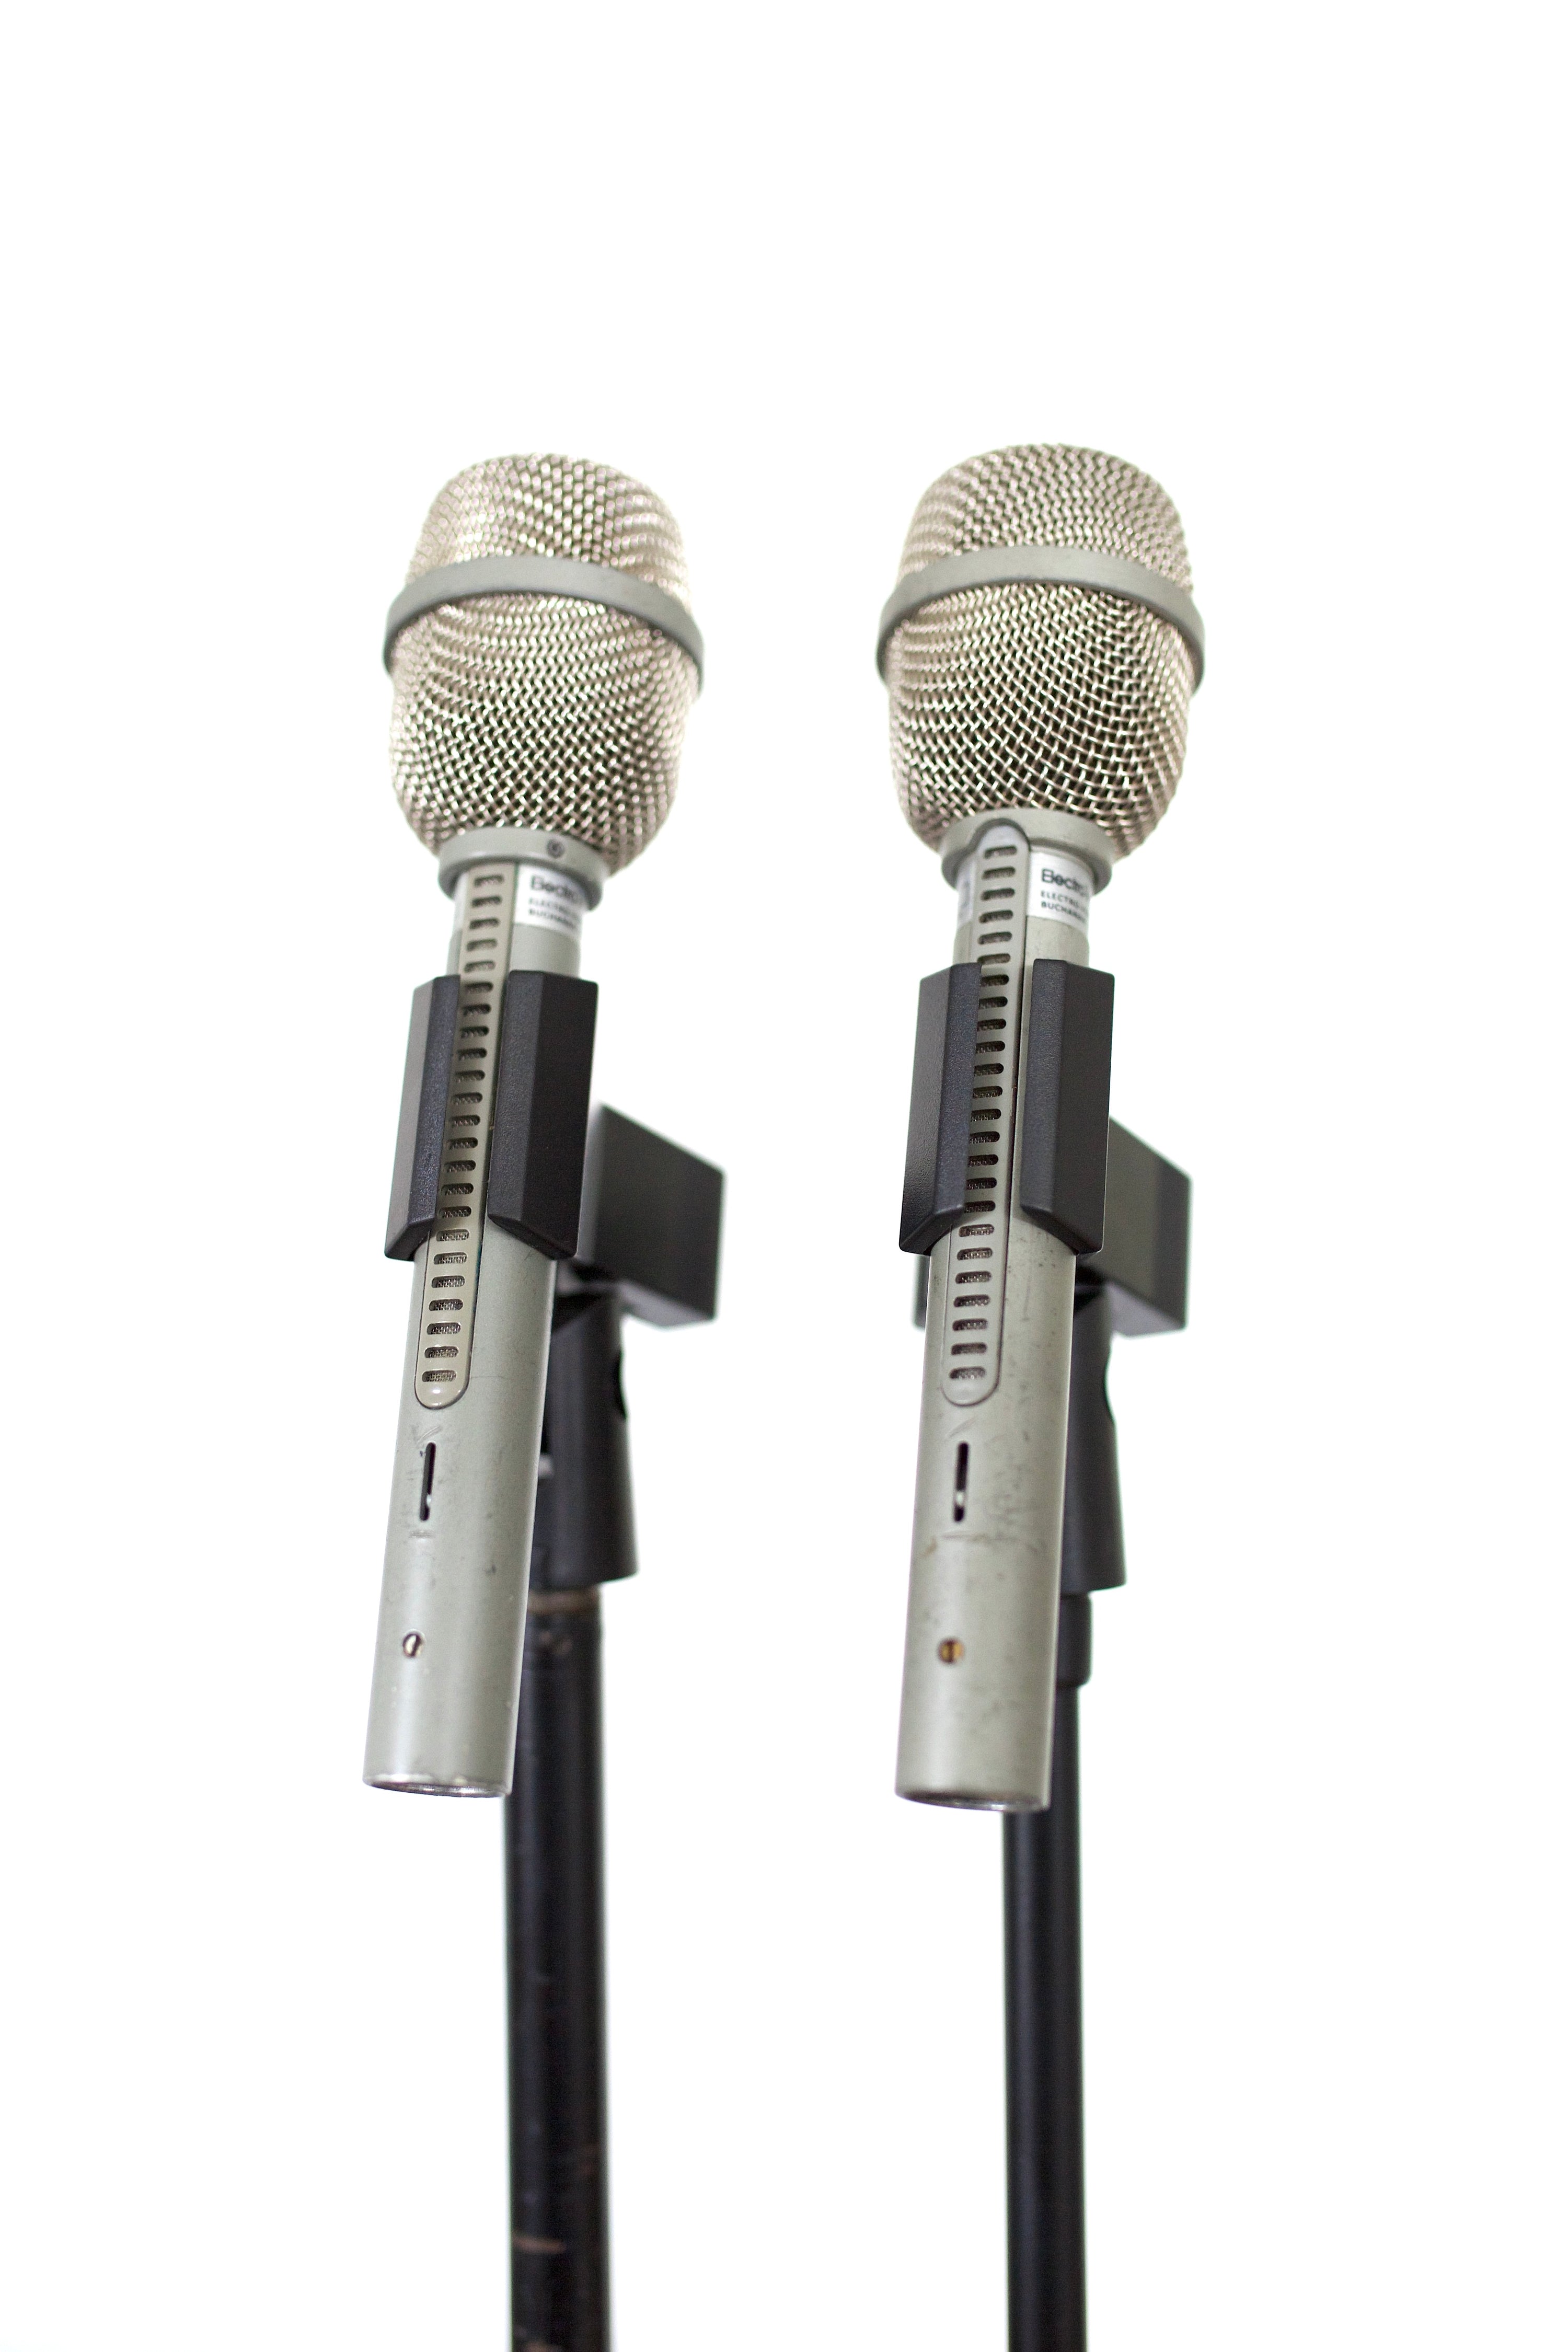 Electro Voice RE-11 Dynamic Microphone Pair